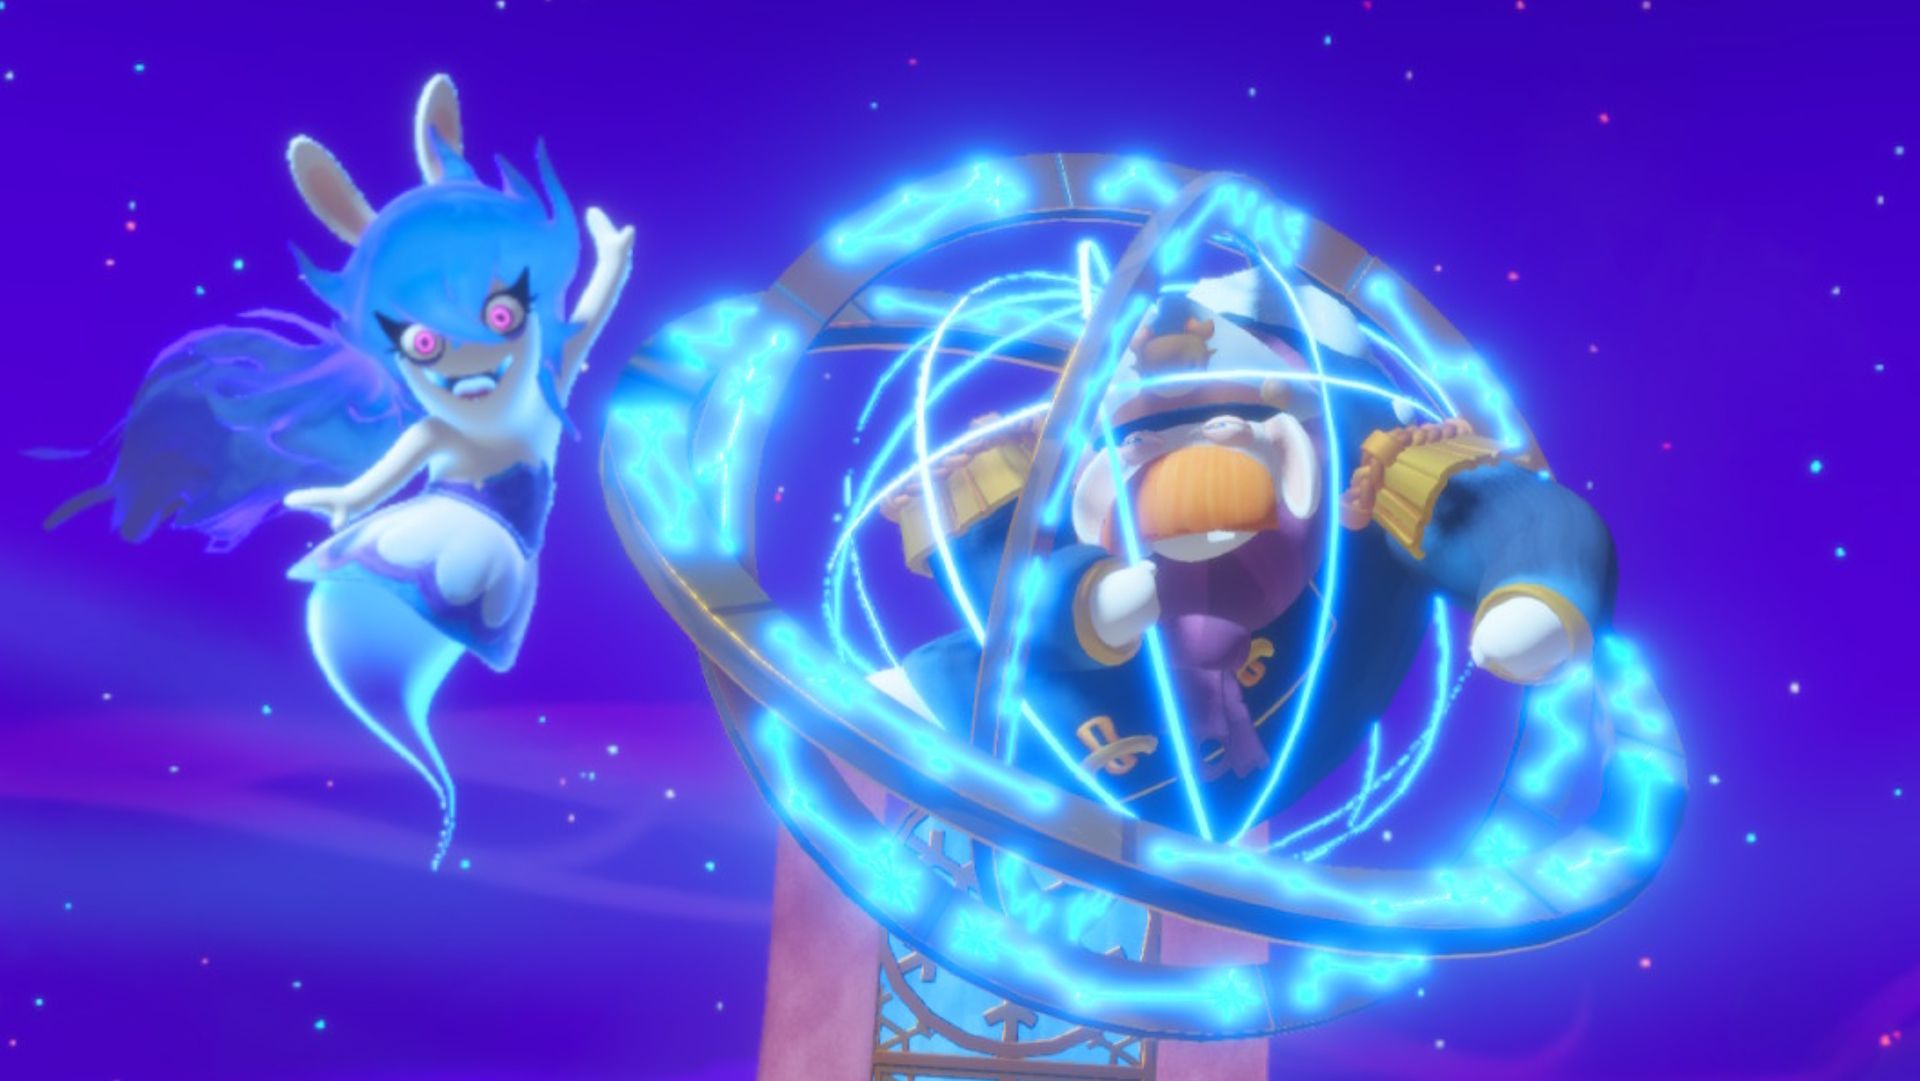 Mario + Rabbids Sparks of Hope's Midnite Capturing Captain Orion in a cage